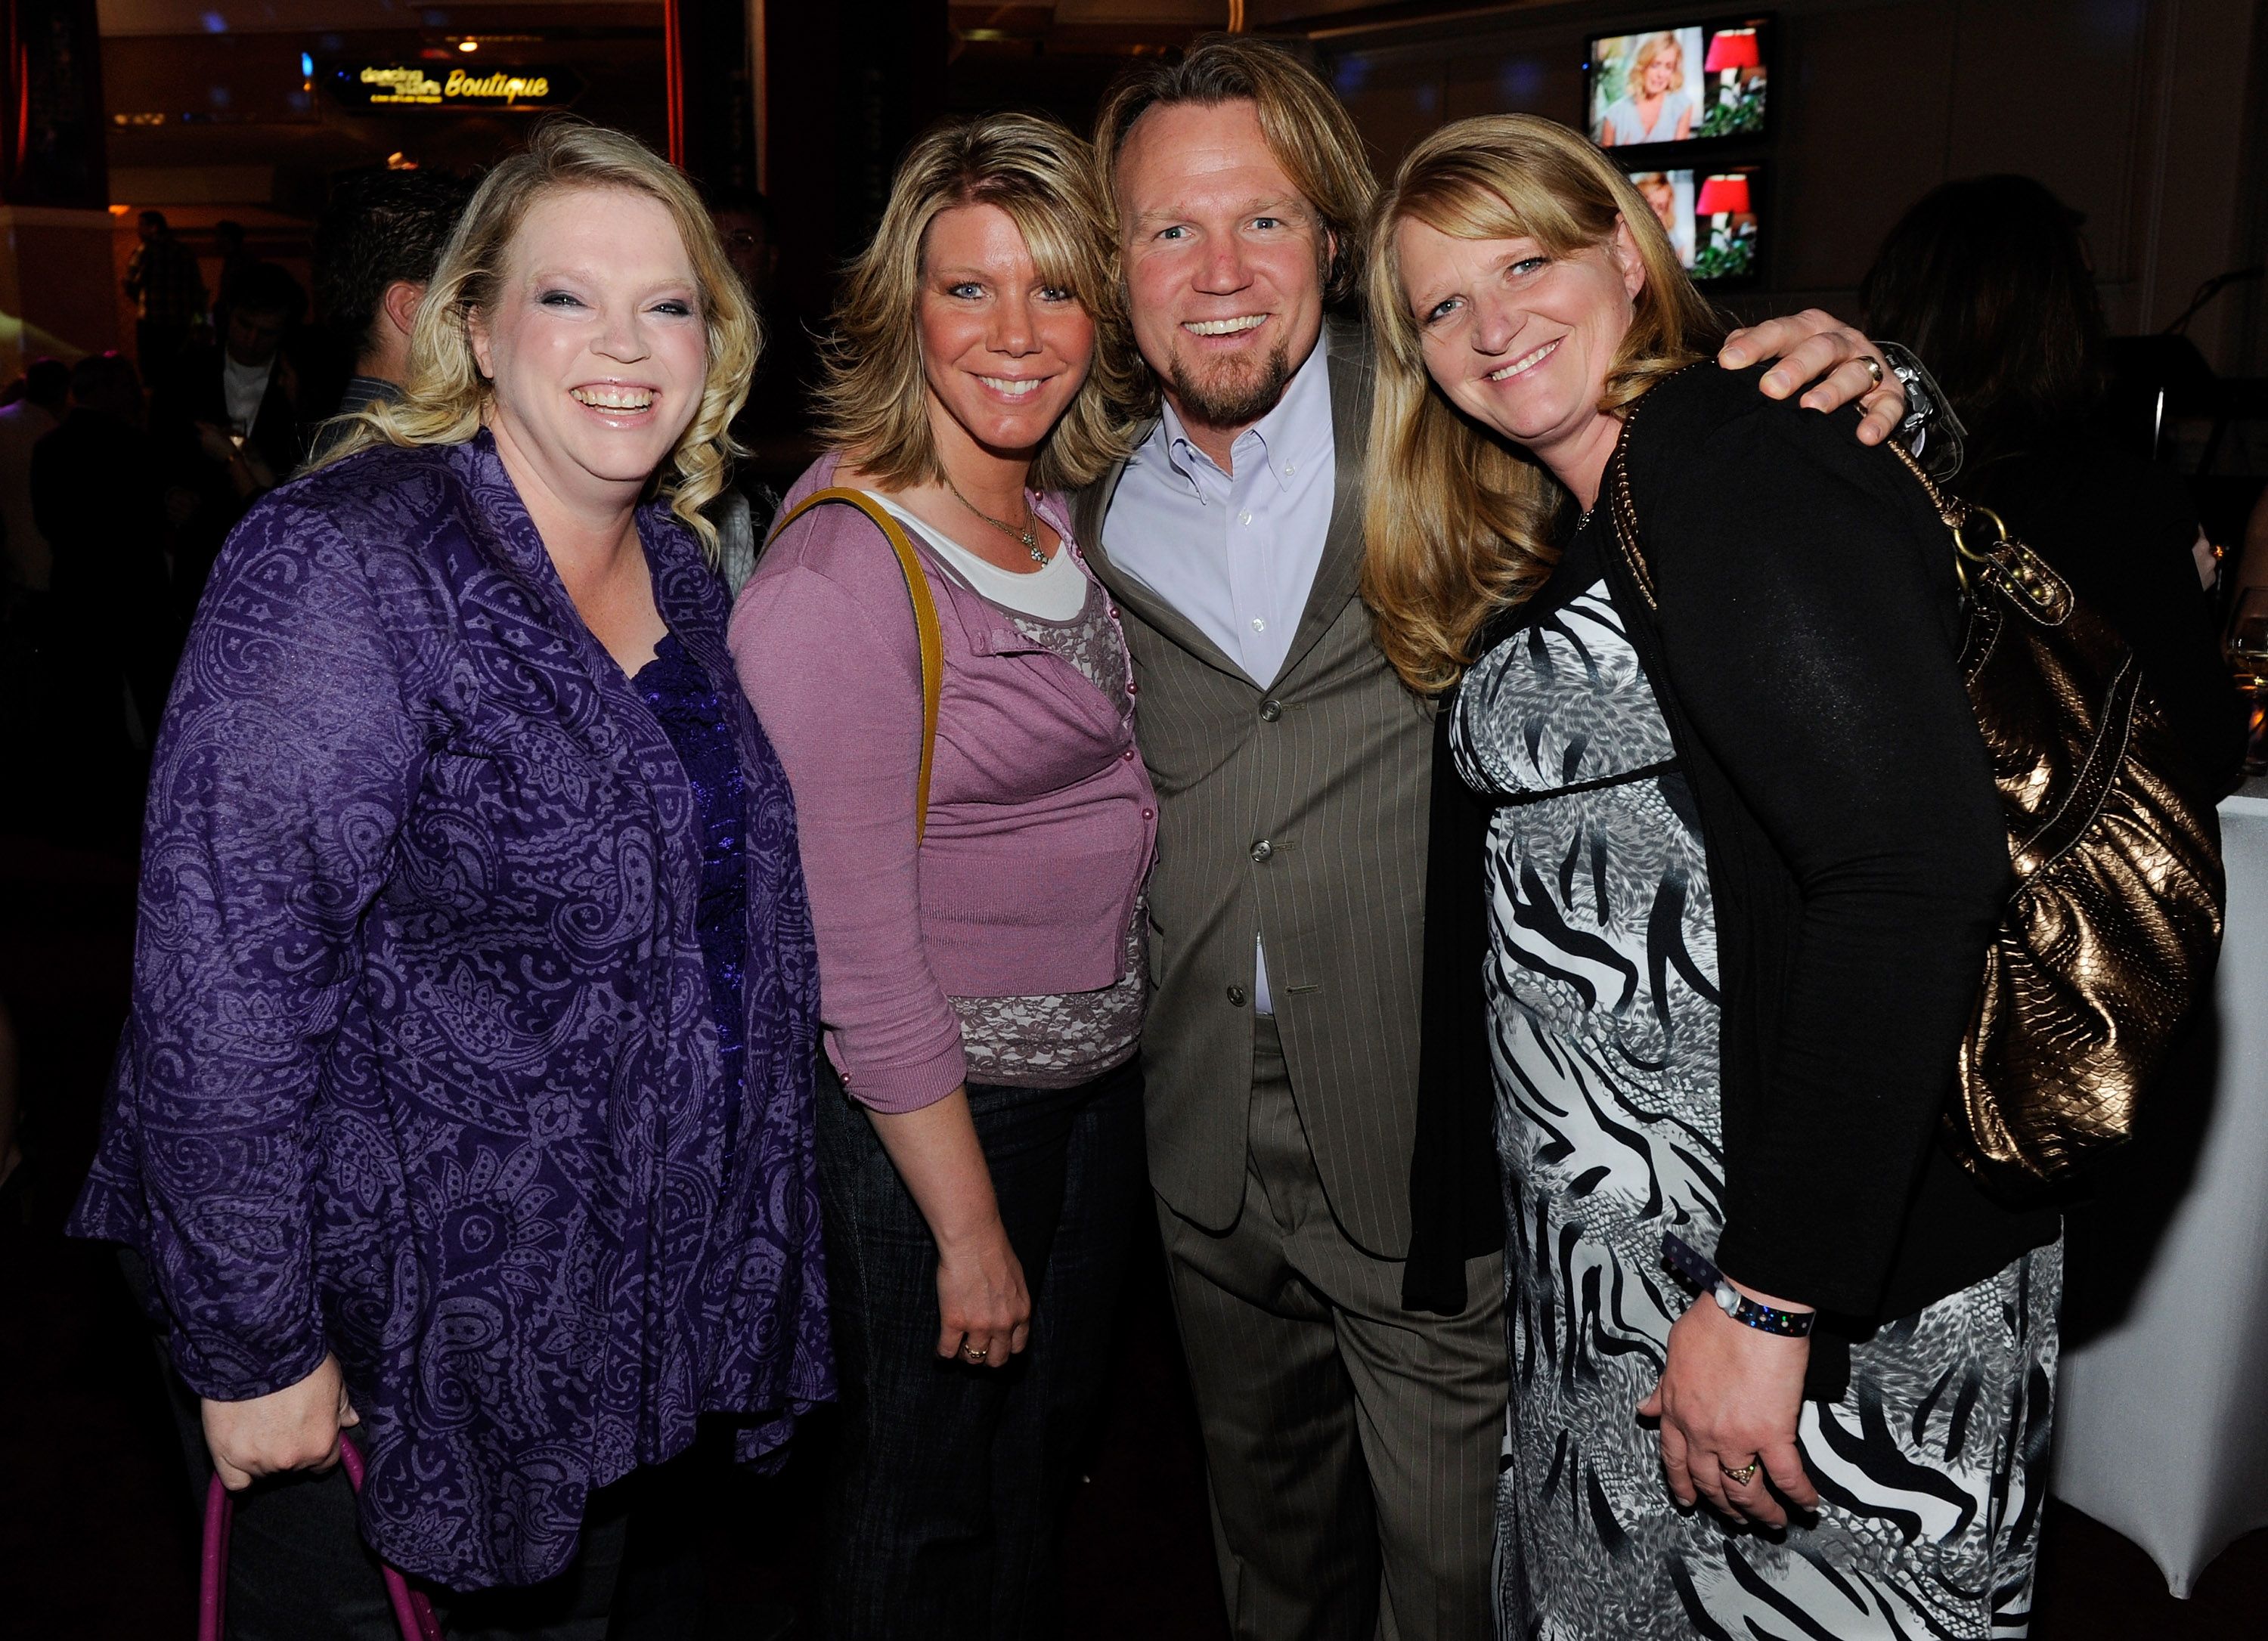 Janelle Brown, Meri Brown, Kody Brown and Christine Brown from "Sister Wives" at a pre-show reception for the grand opening of "Dancing With the Stars on April 13, 2012 | Photo: Getty Images